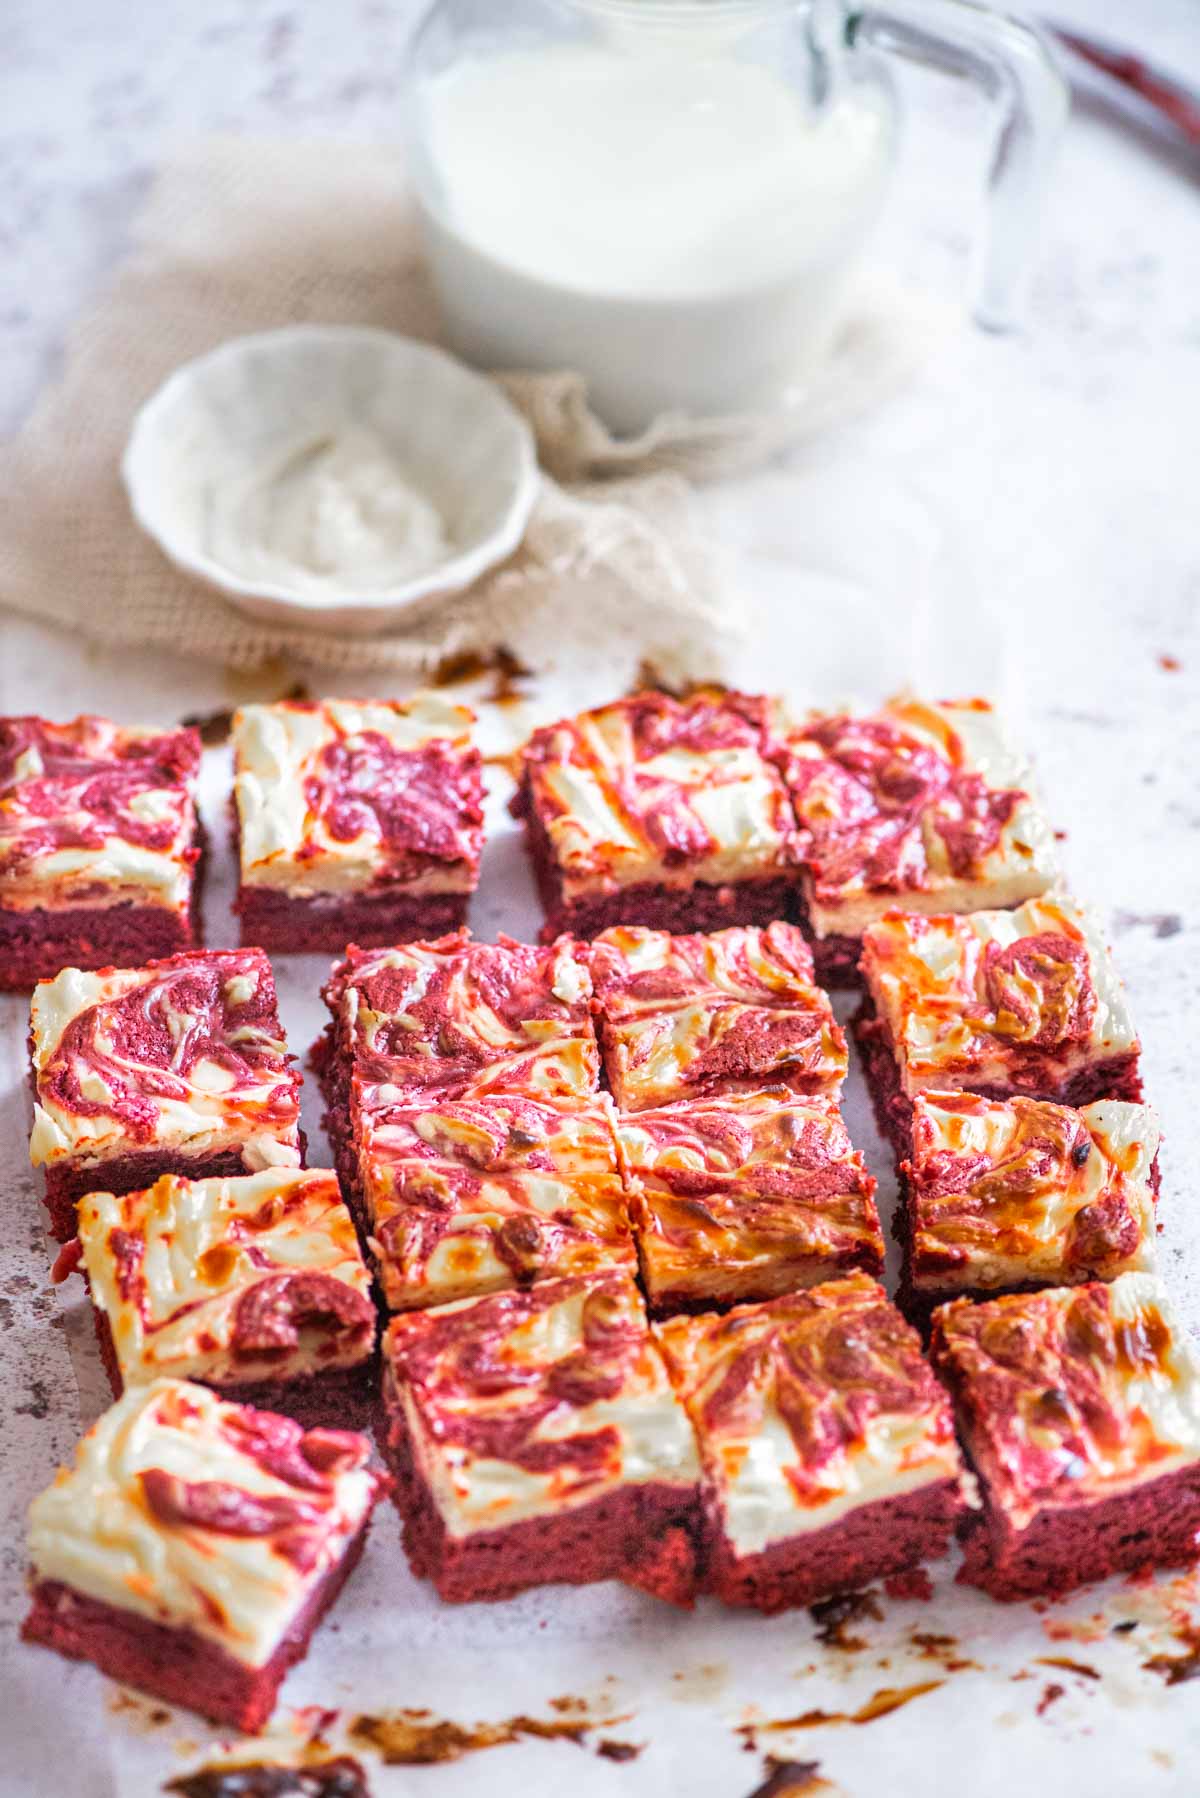 Pices of red velvet and cheesecake brownies on a white surface